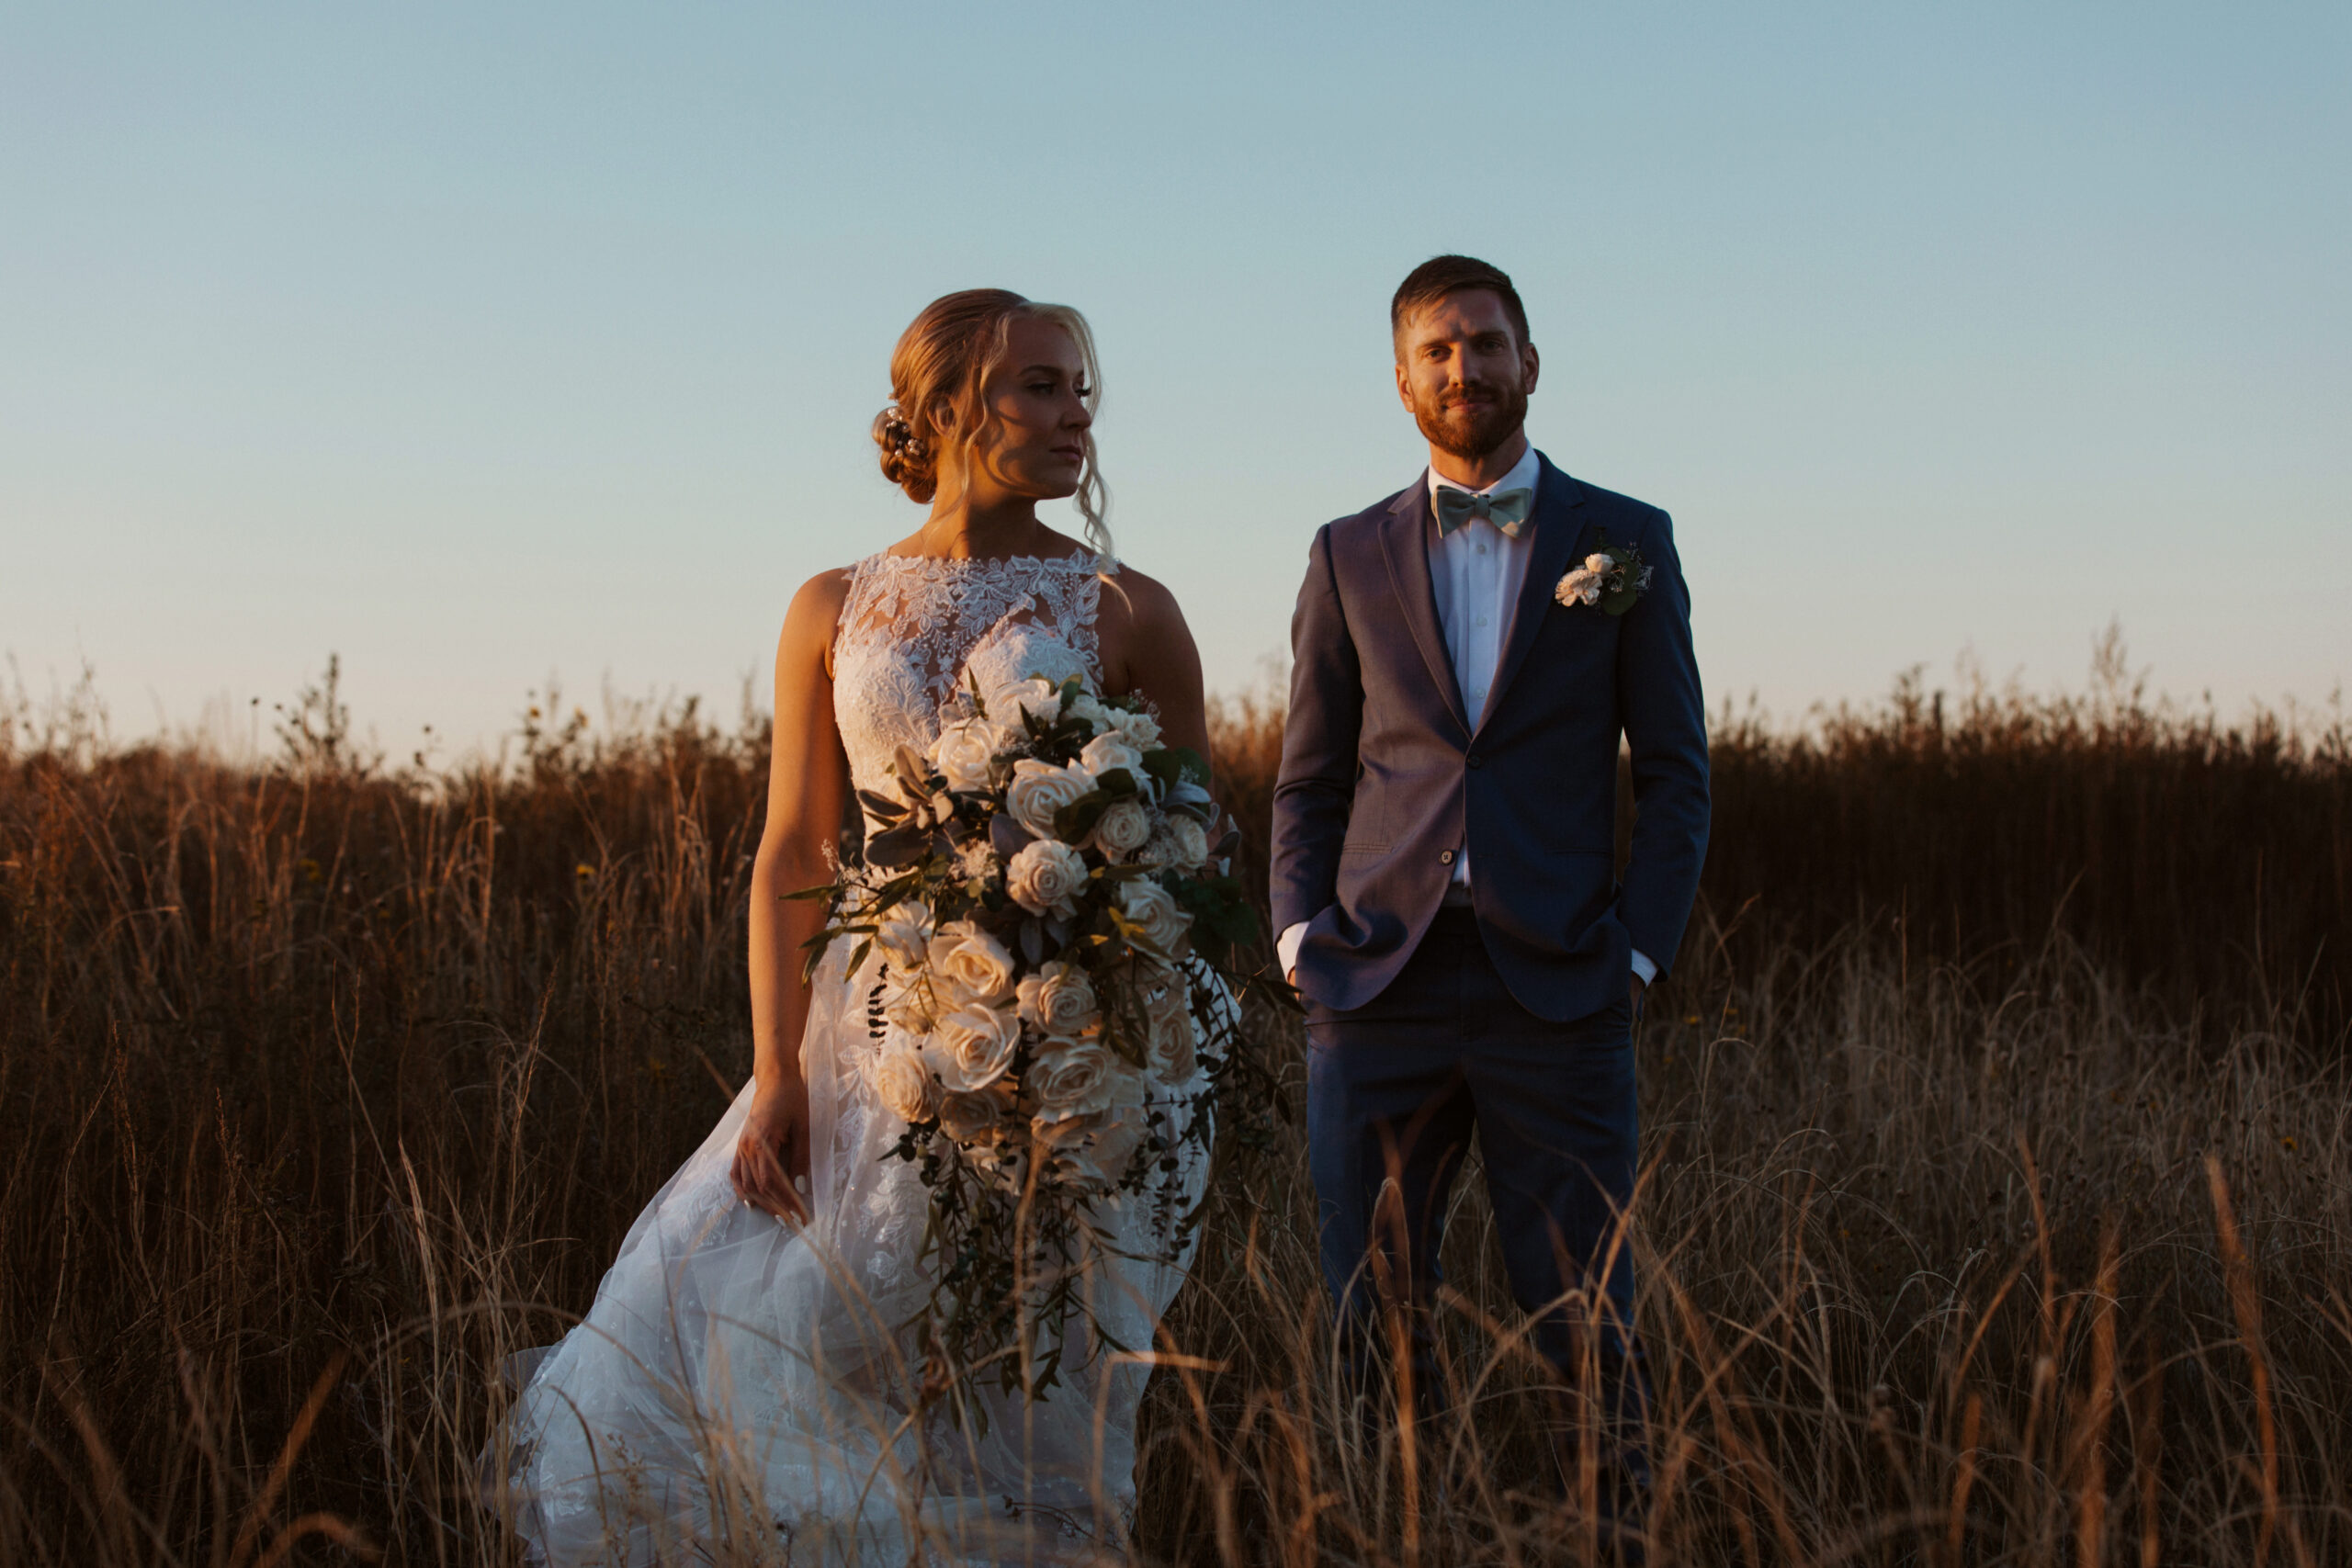 Bride and groom stand in a field at dusk in an editorial pose.